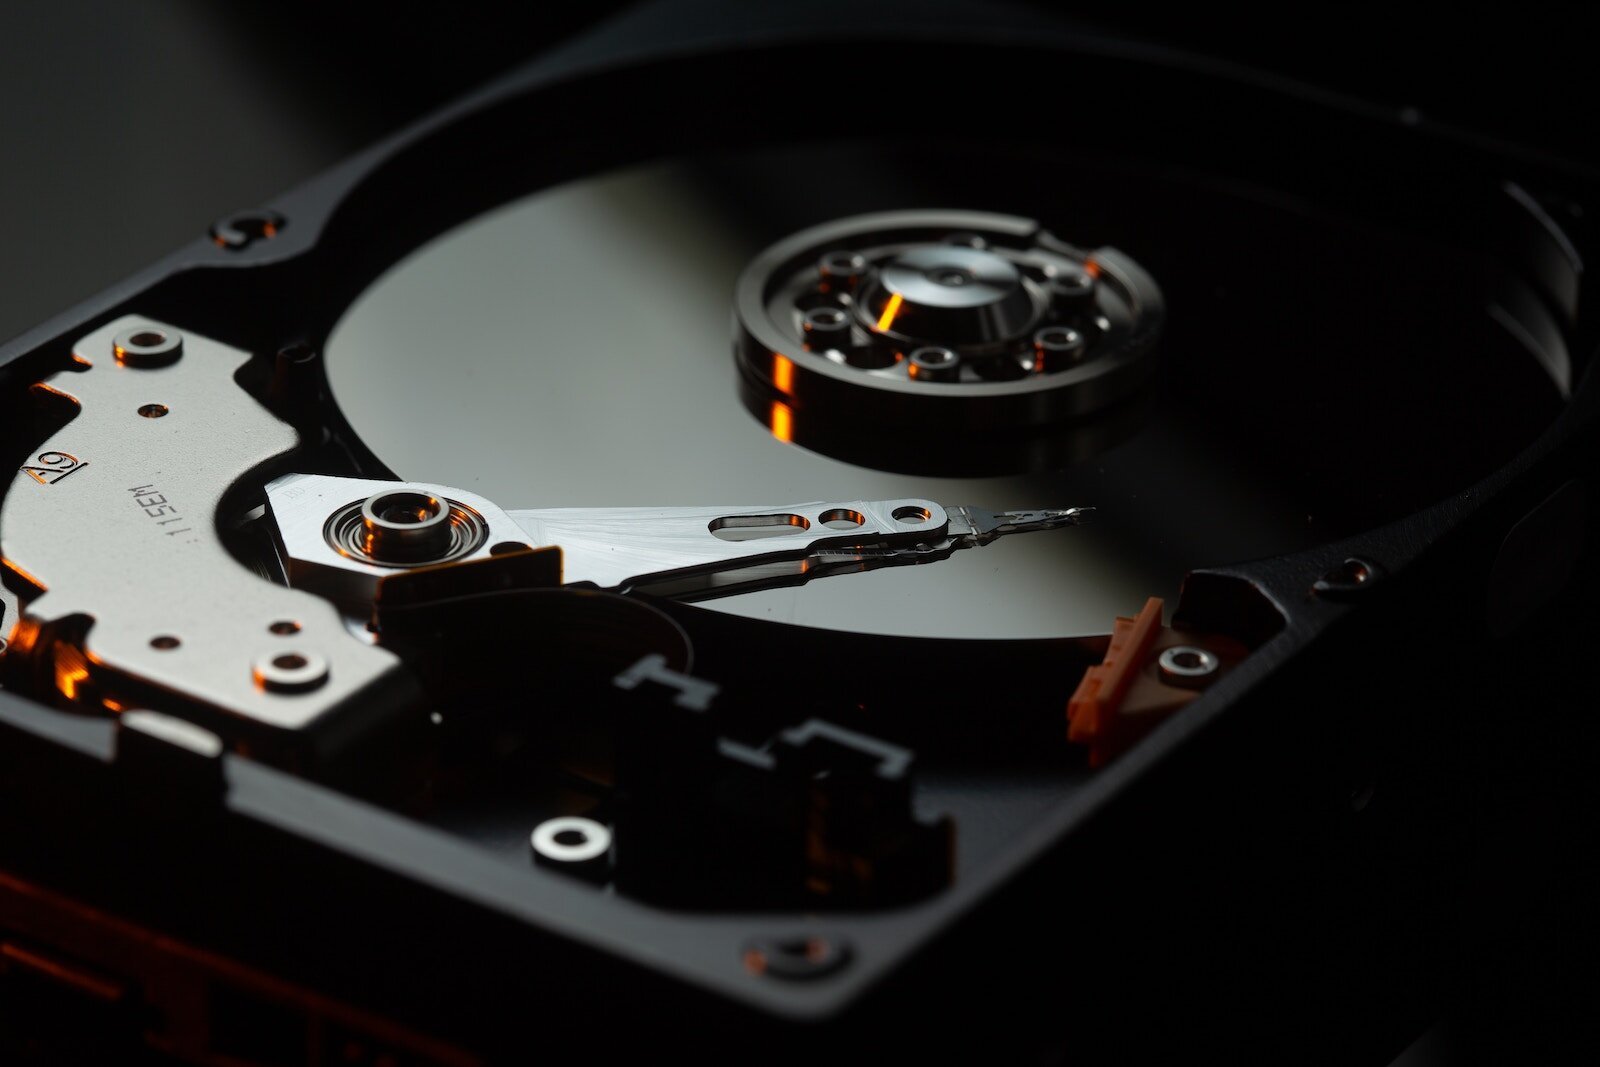 Study revealed that hard drives usually fail in less than 3 years – hard drive